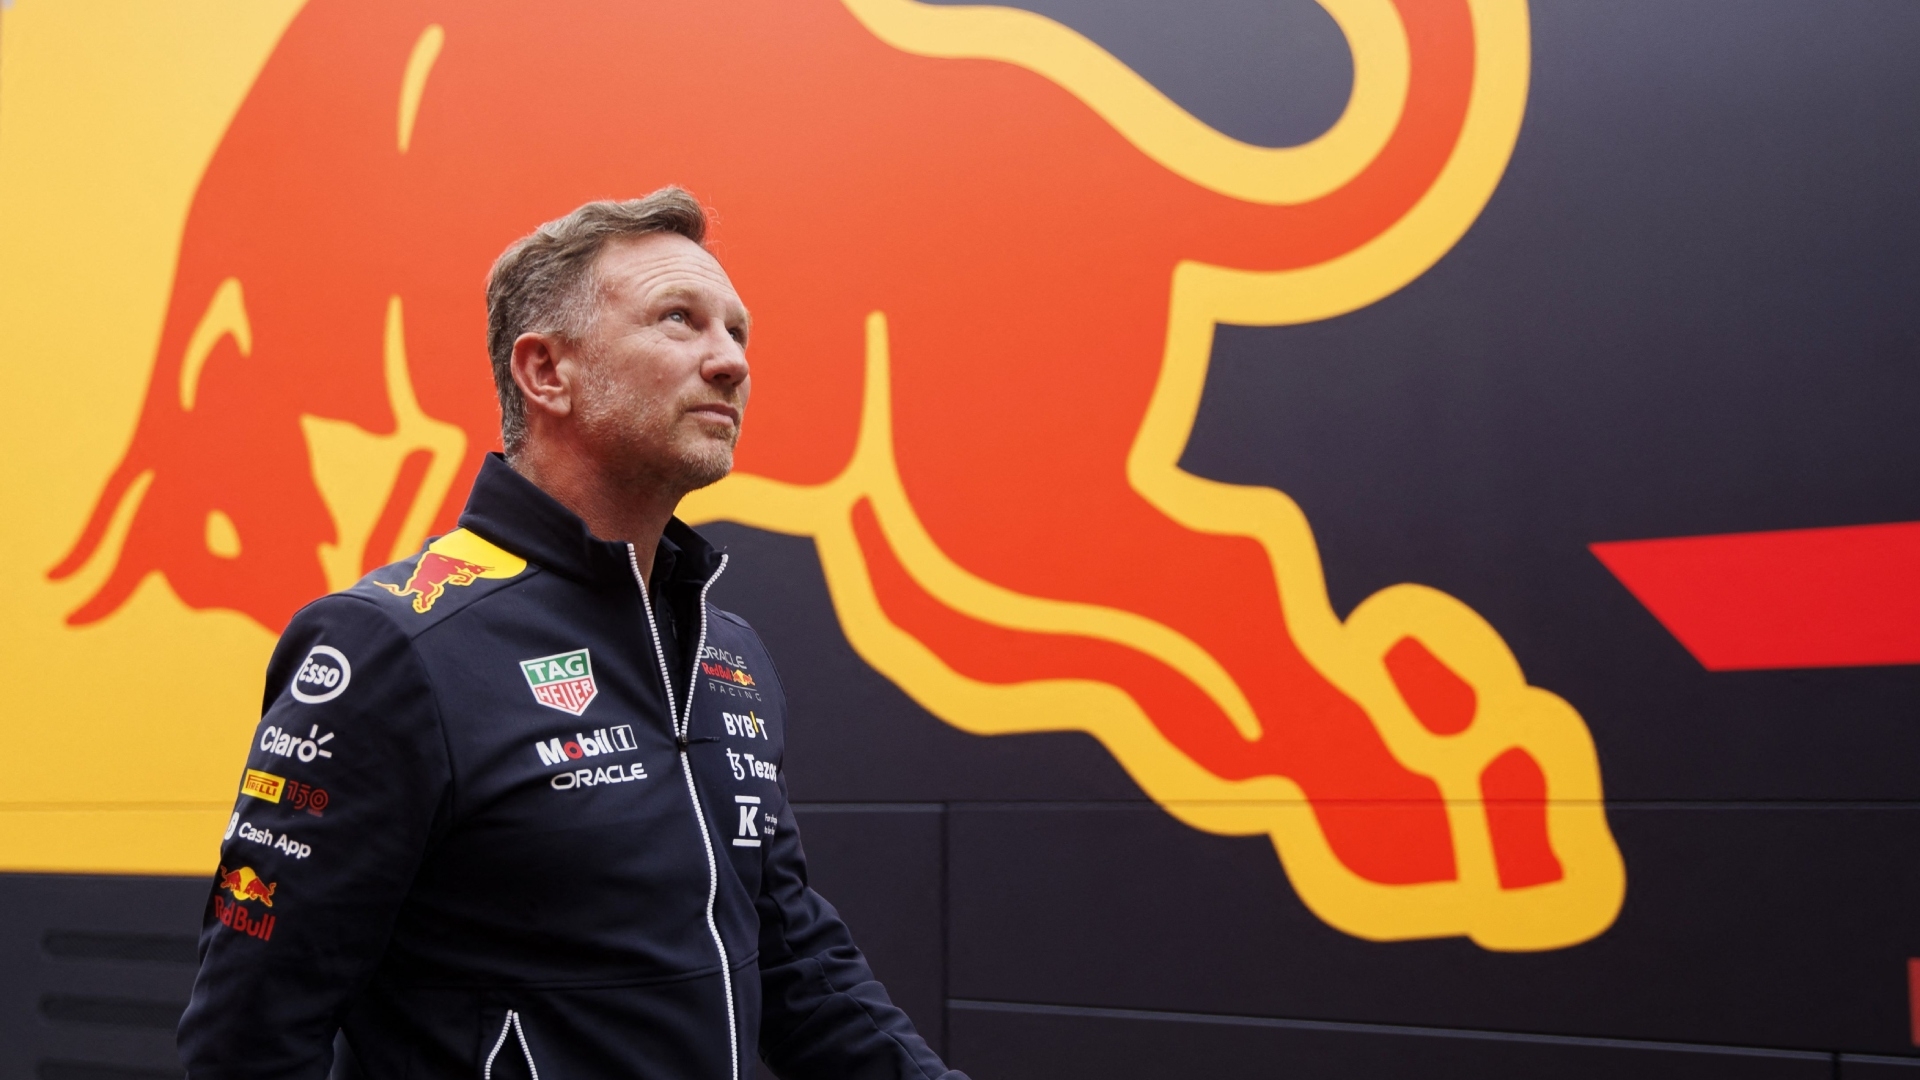 Is it fair for Red Bull to own two F1 teams?